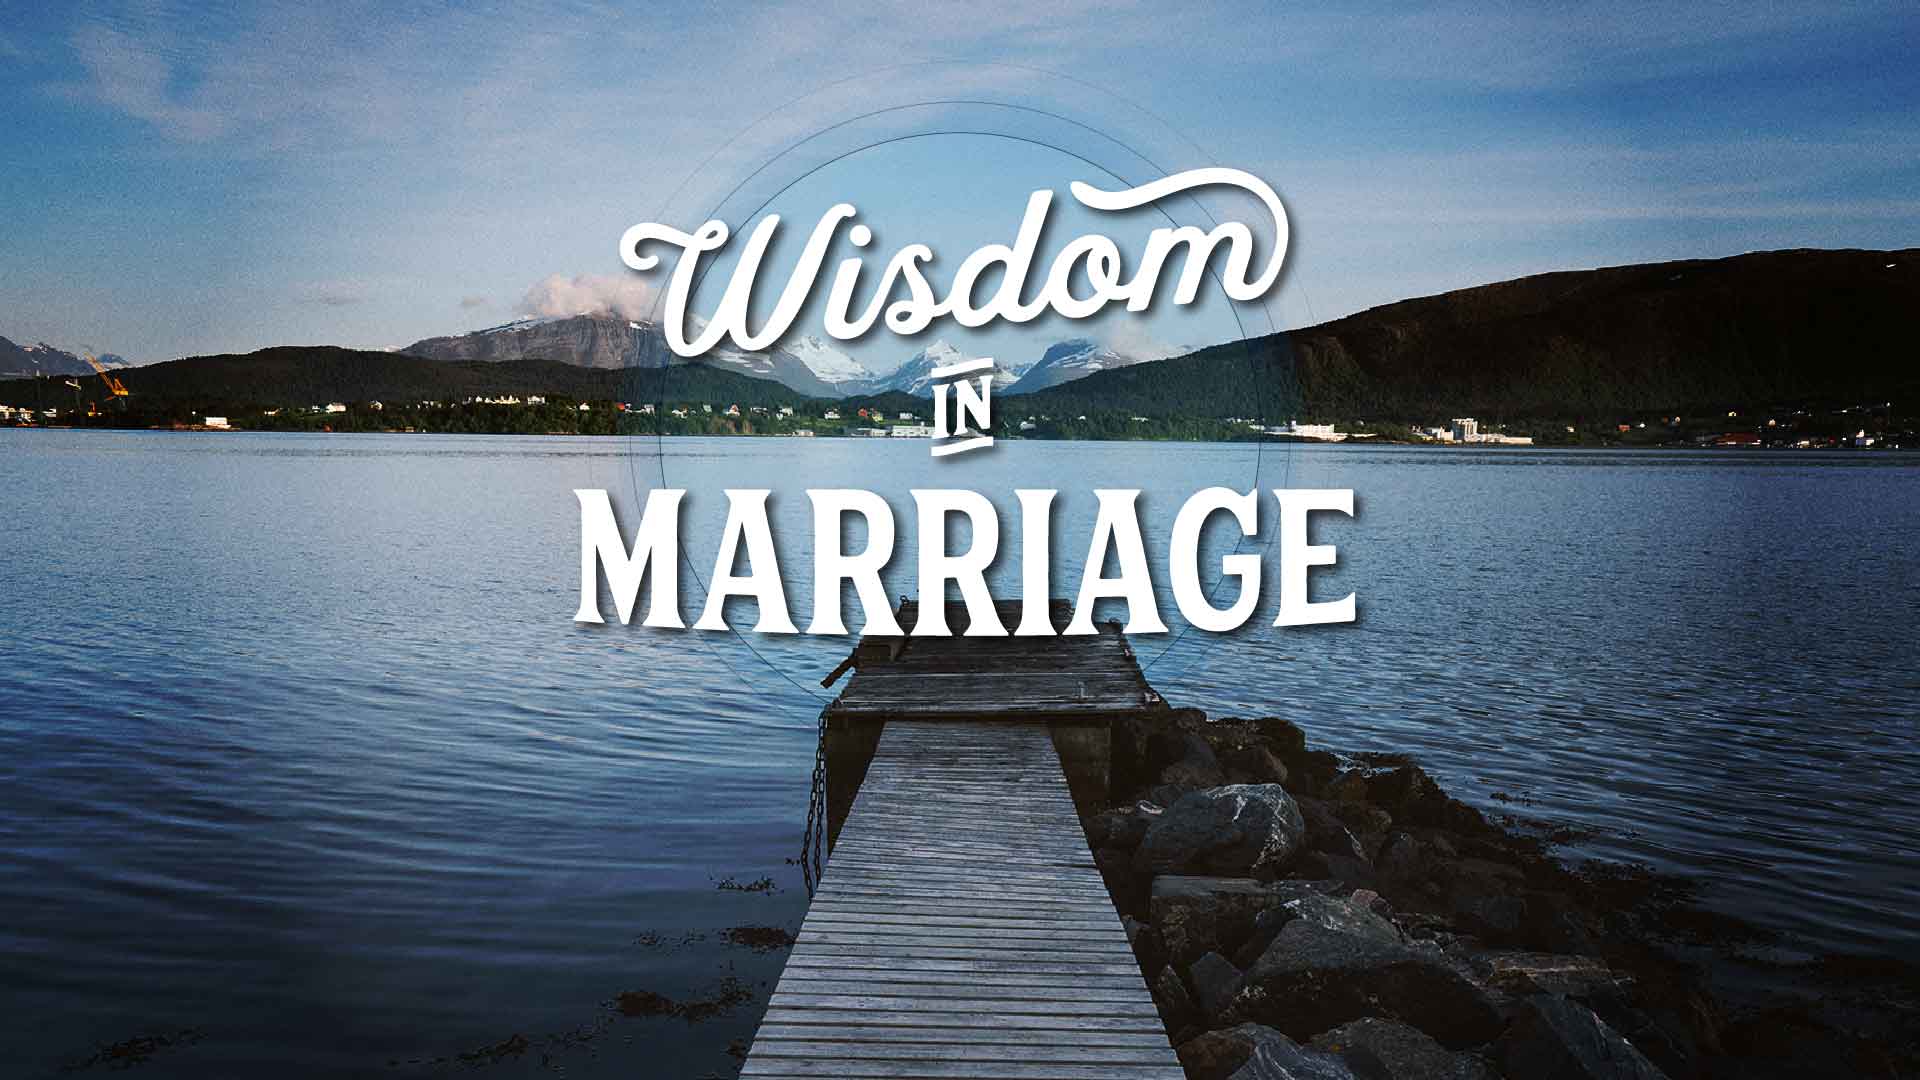 Wisdom in Marriage - Being a Godly Spouse